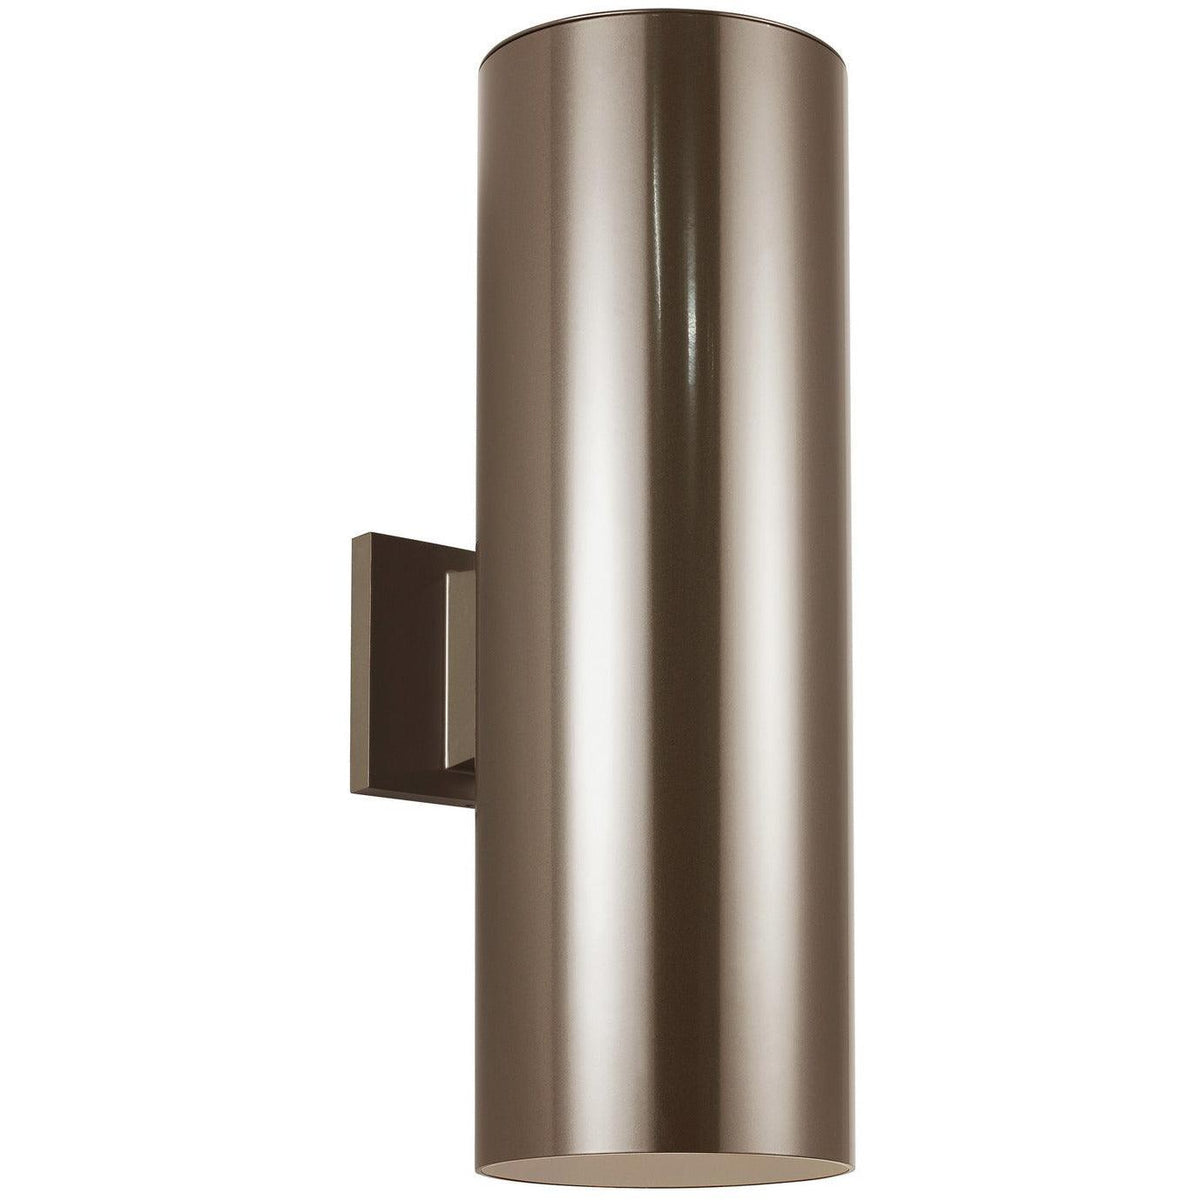 Generation Lighting - Outdoor Cylinders LED Outdoor Wall Sconce - 8313997S-10 | Montreal Lighting & Hardware